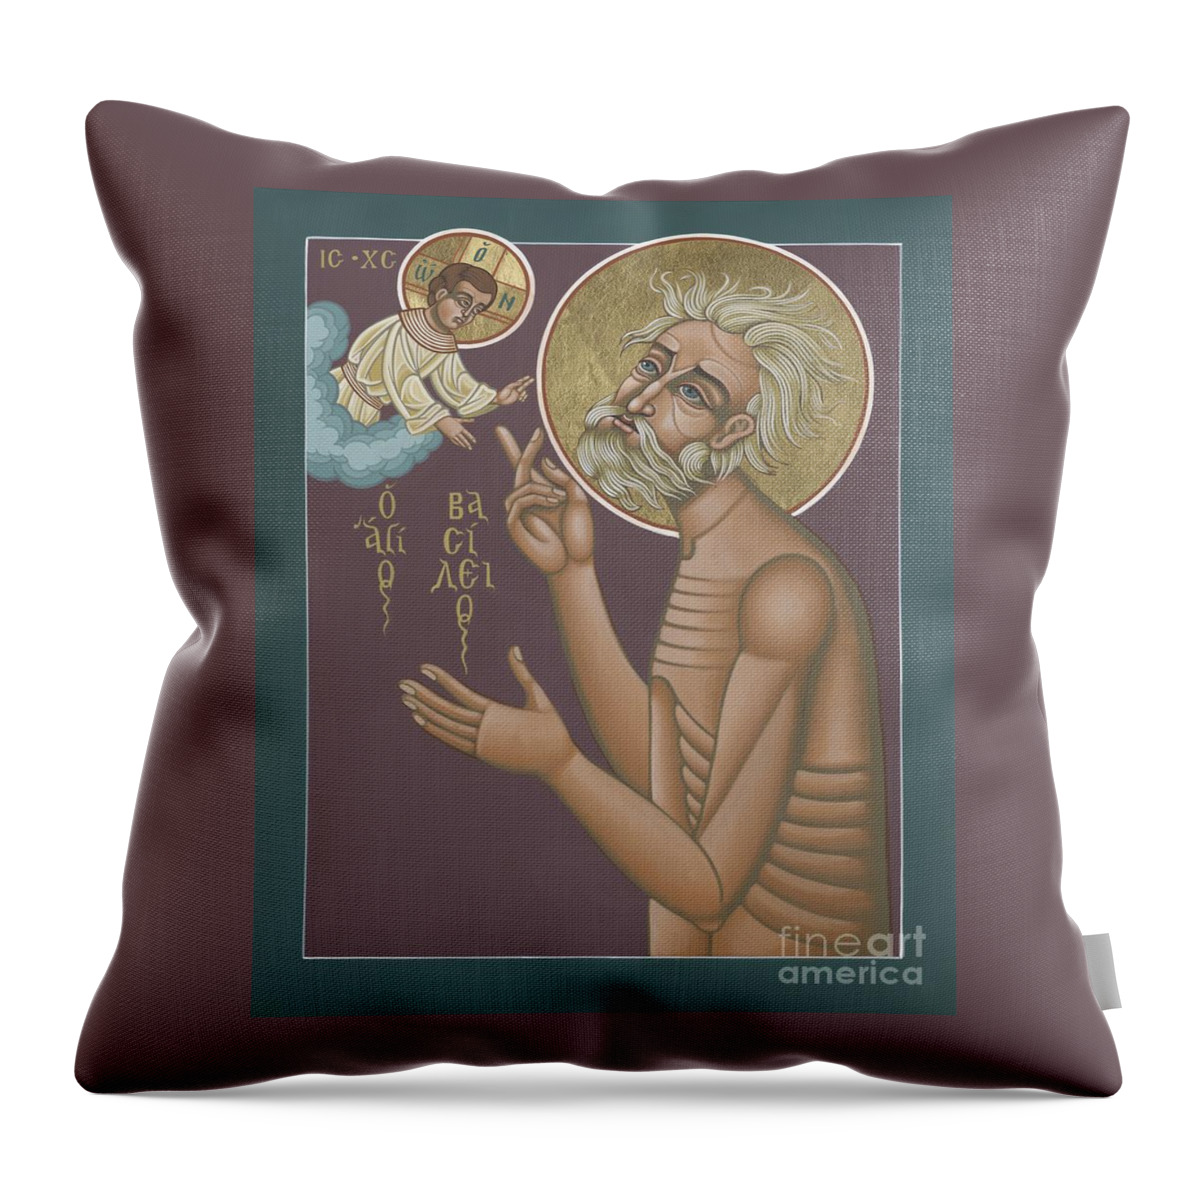 St. Vasily Is Also Known As St. Basil And Is The Namesake Of St. Basil's Cathedral In Moscow Throw Pillow featuring the painting St. Vasily the Holy Fool 246 by William Hart McNichols